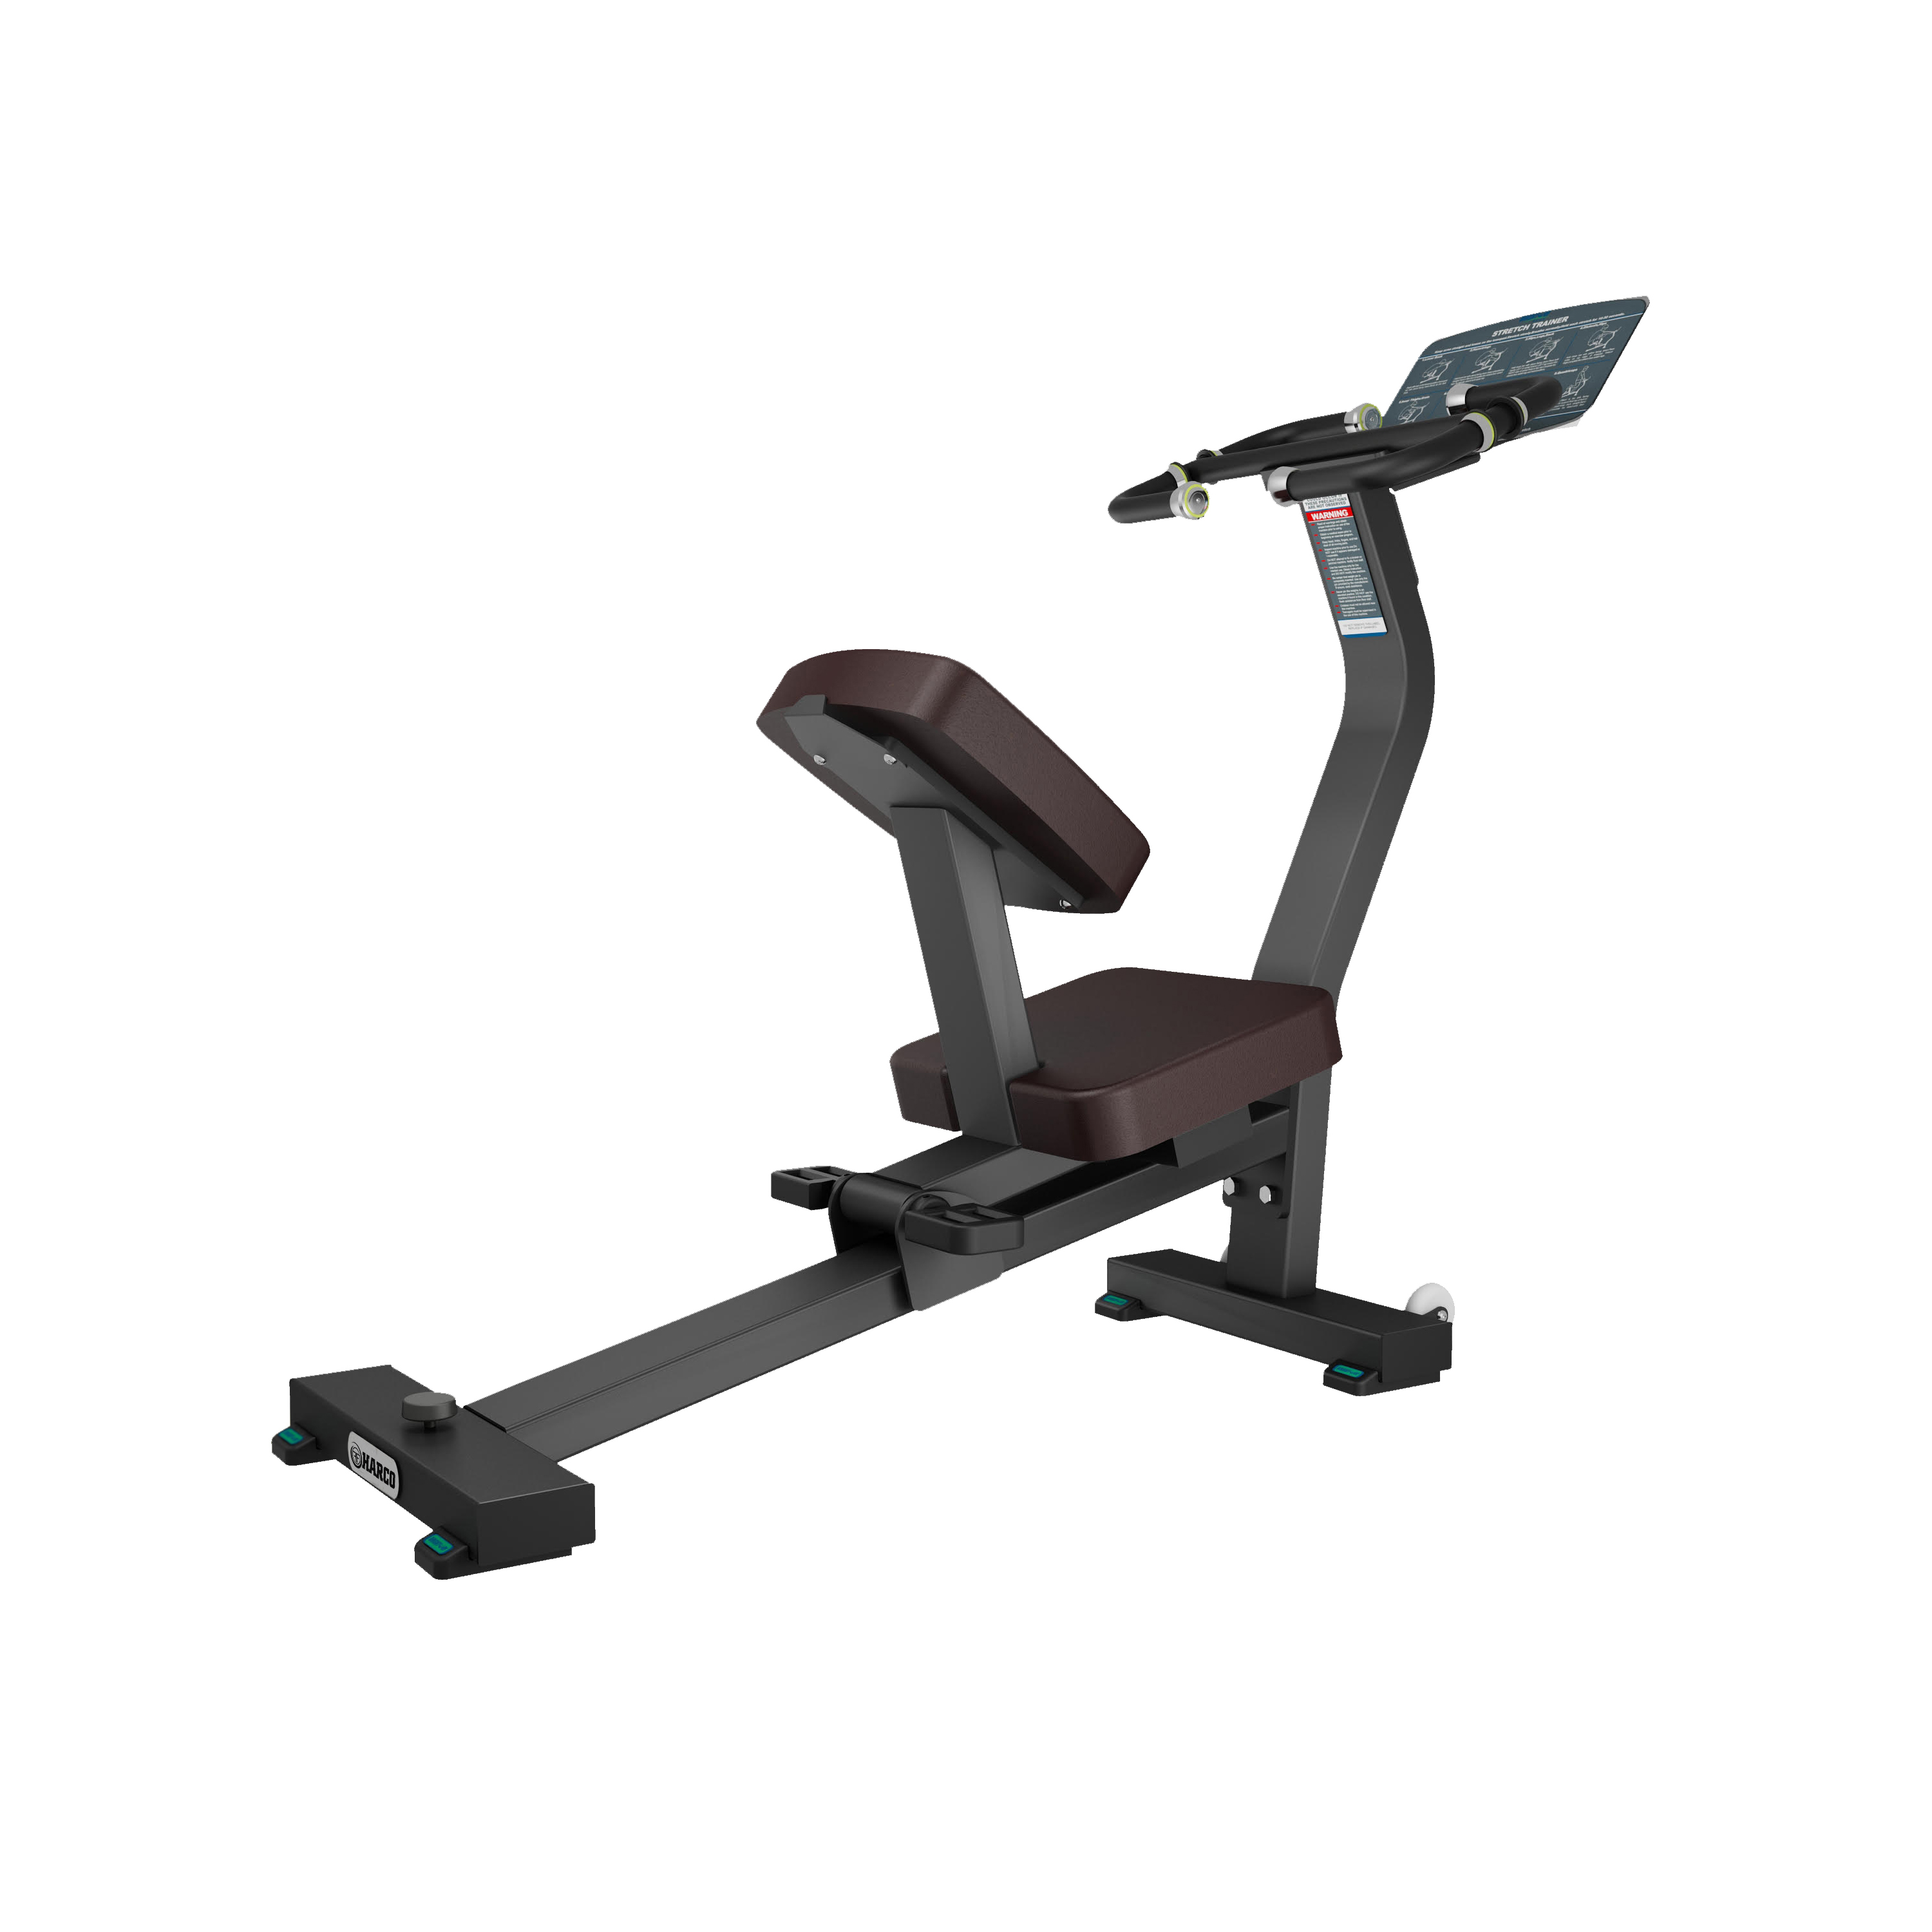 SRTB-71 STRETCH TRAINER – Harco India